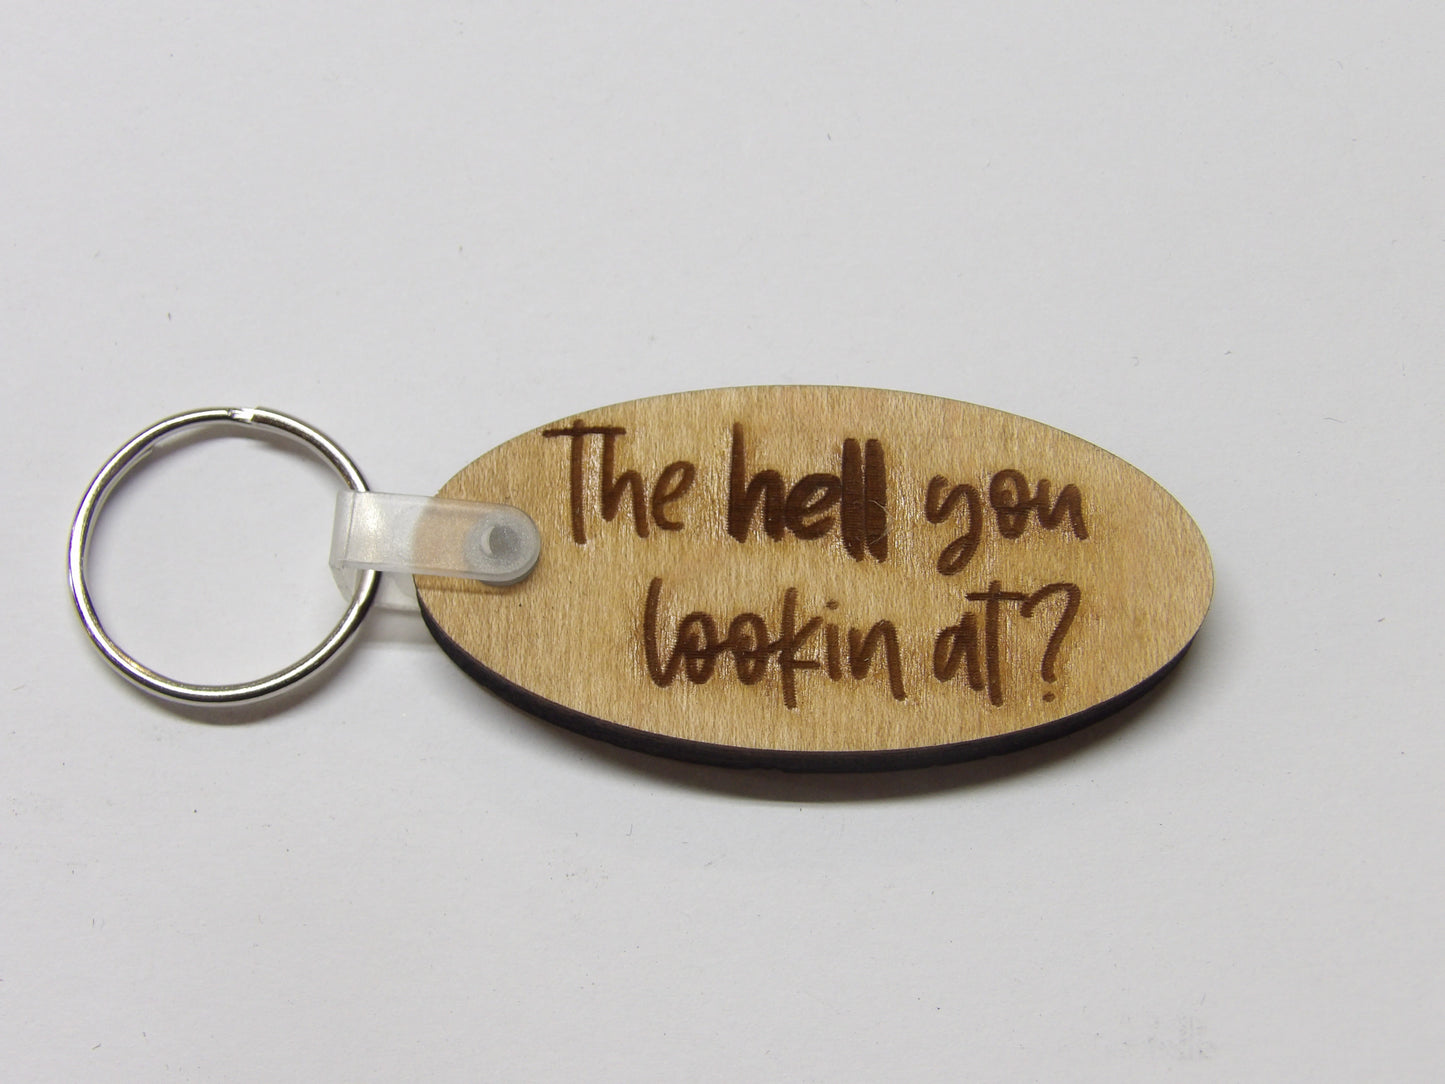 The H*ll You Lookin At Keychain